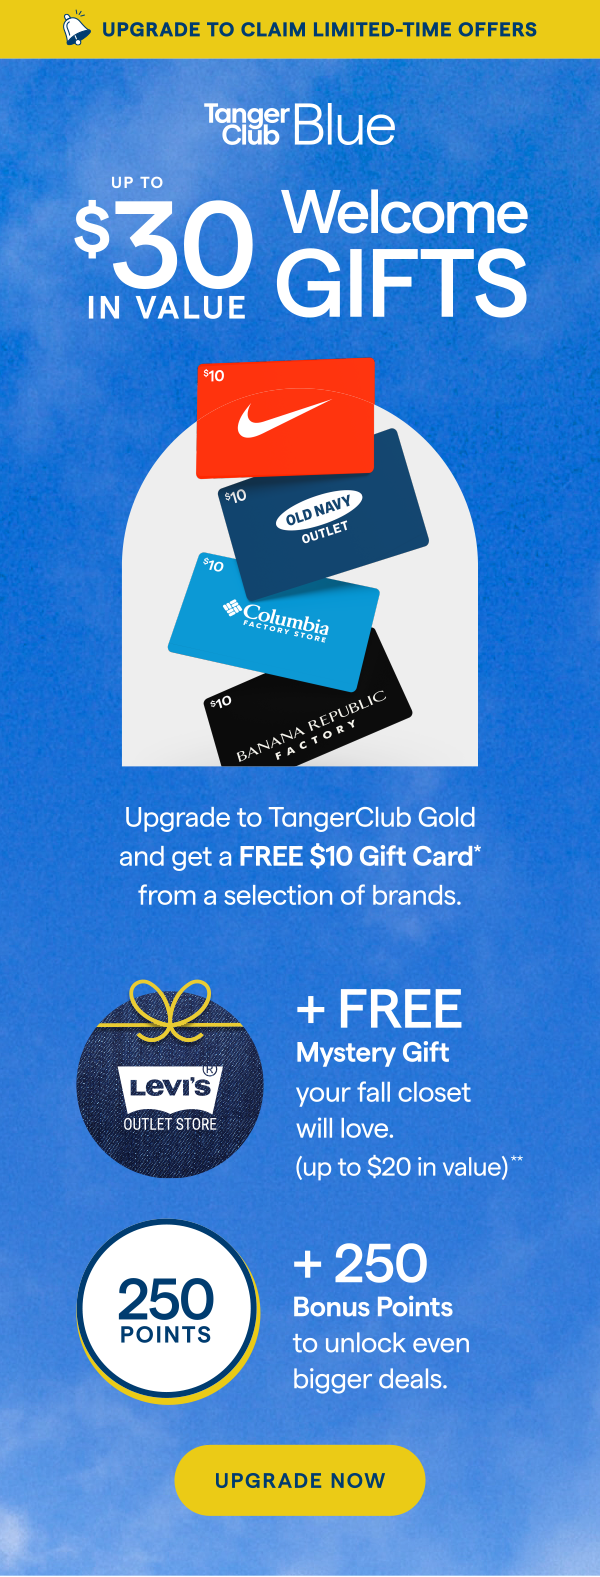 UPGRADE TO CLAIM LIMITED-TIME OFFERS! Upgrade to TangerClub Gold and get a FREE $10 Gift Card* from a selection of brands. UPGRADE NOW > 